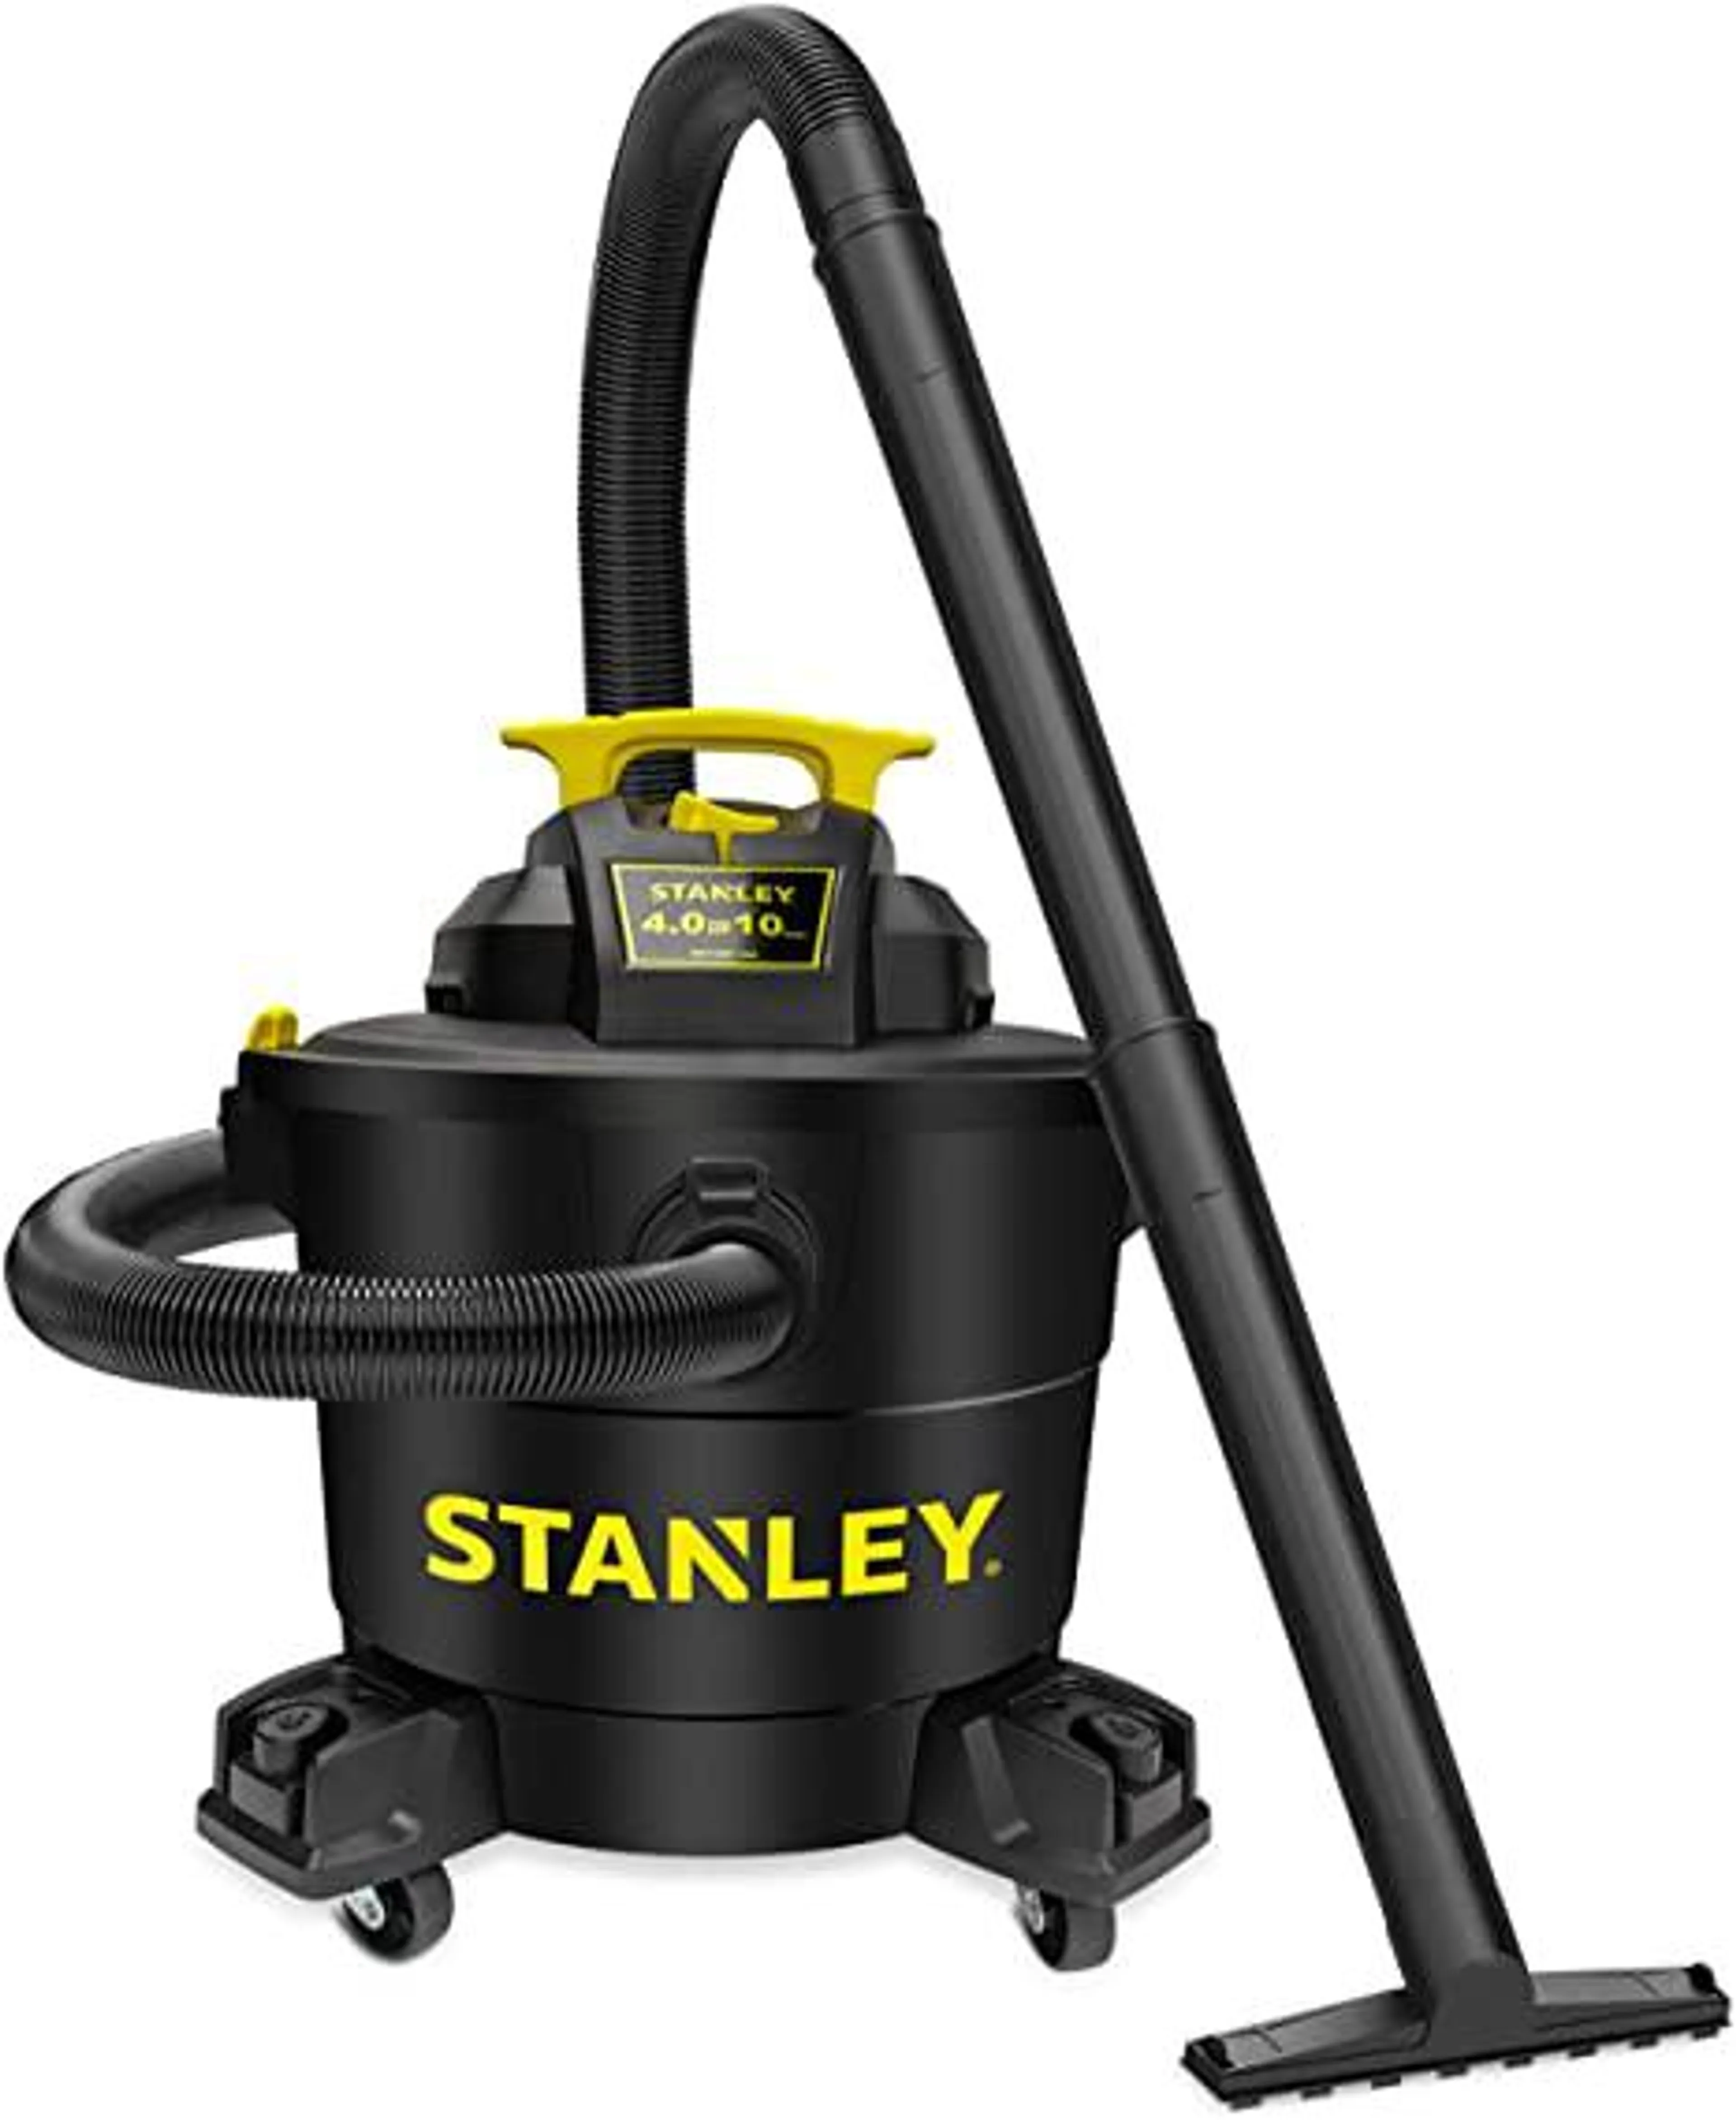 Stanley Wet/Dry Vacuum SL18191P, 10 Gallon 4 Horsepower 16 FT Clean Range Shop Vacuum, Ideal for Home/Garage/Laundry Rooms with Vacuum Attachments, Strong Suction Large Capacity Multiple Accessories